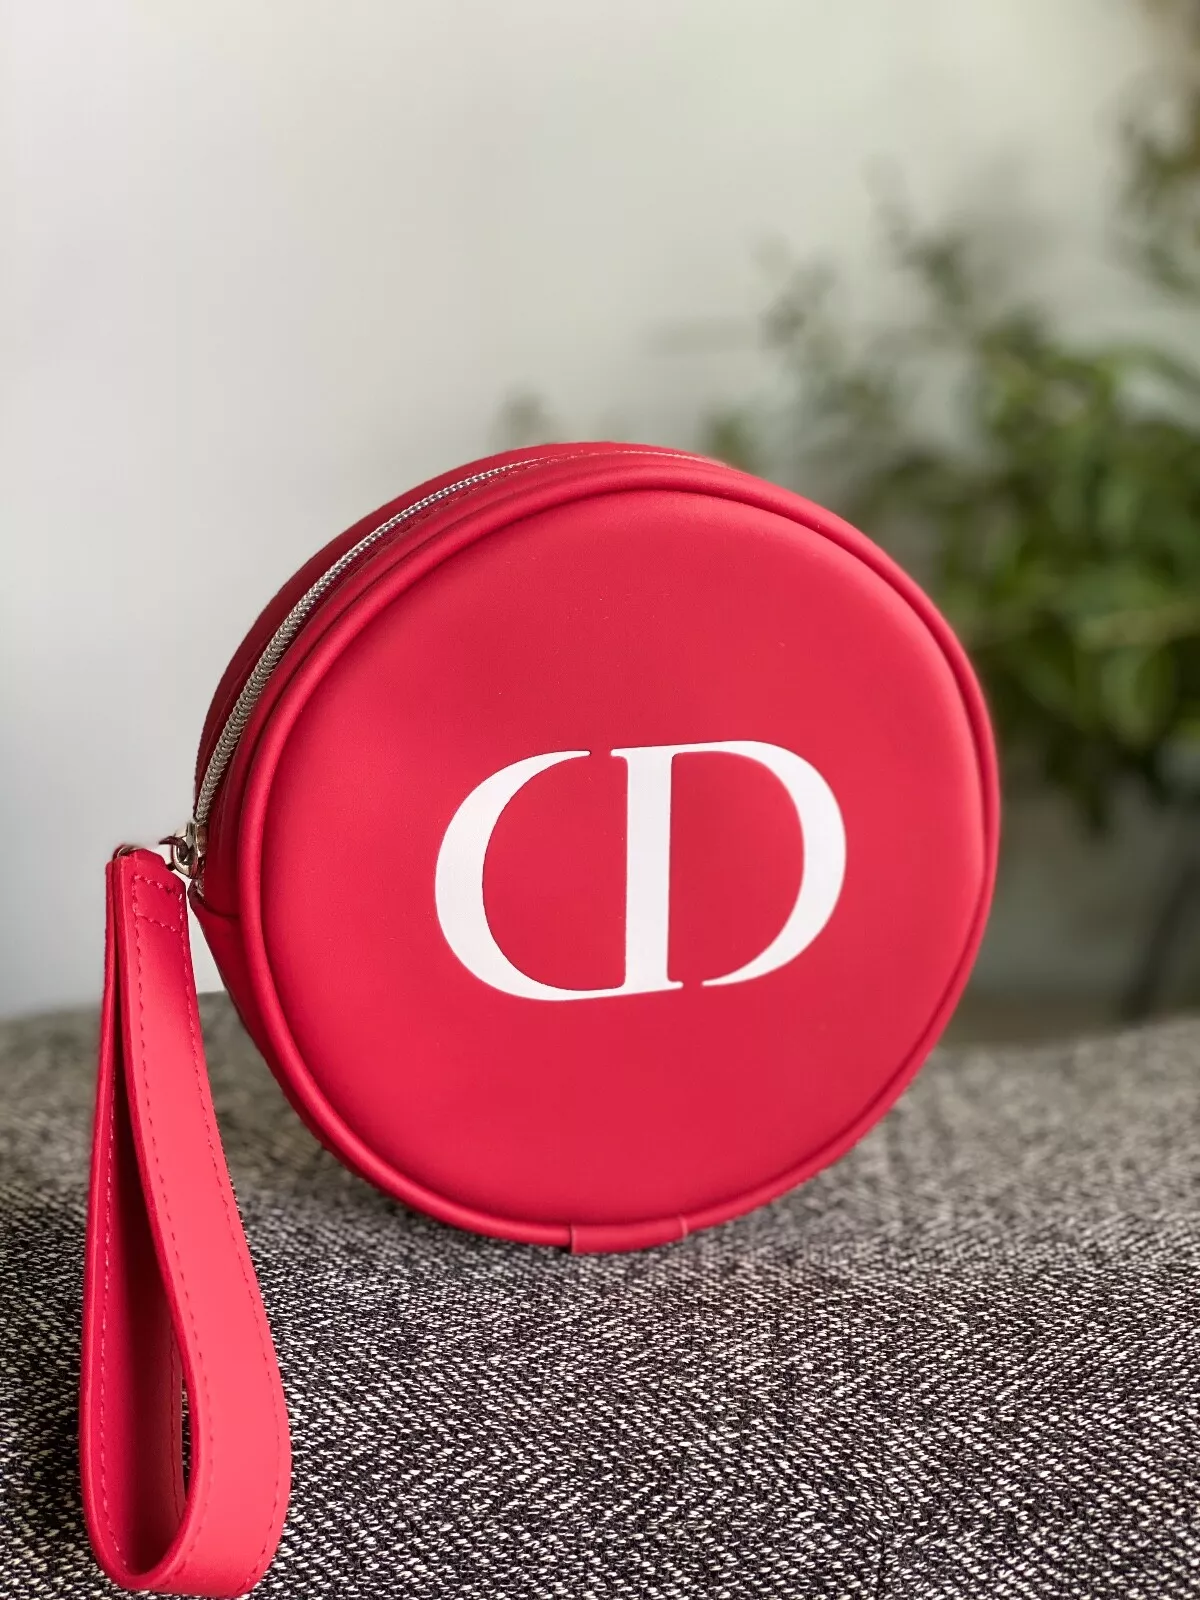 New Dior Beauty Red Makeup Cosmetic Bag Makeup Pouch - $19.00